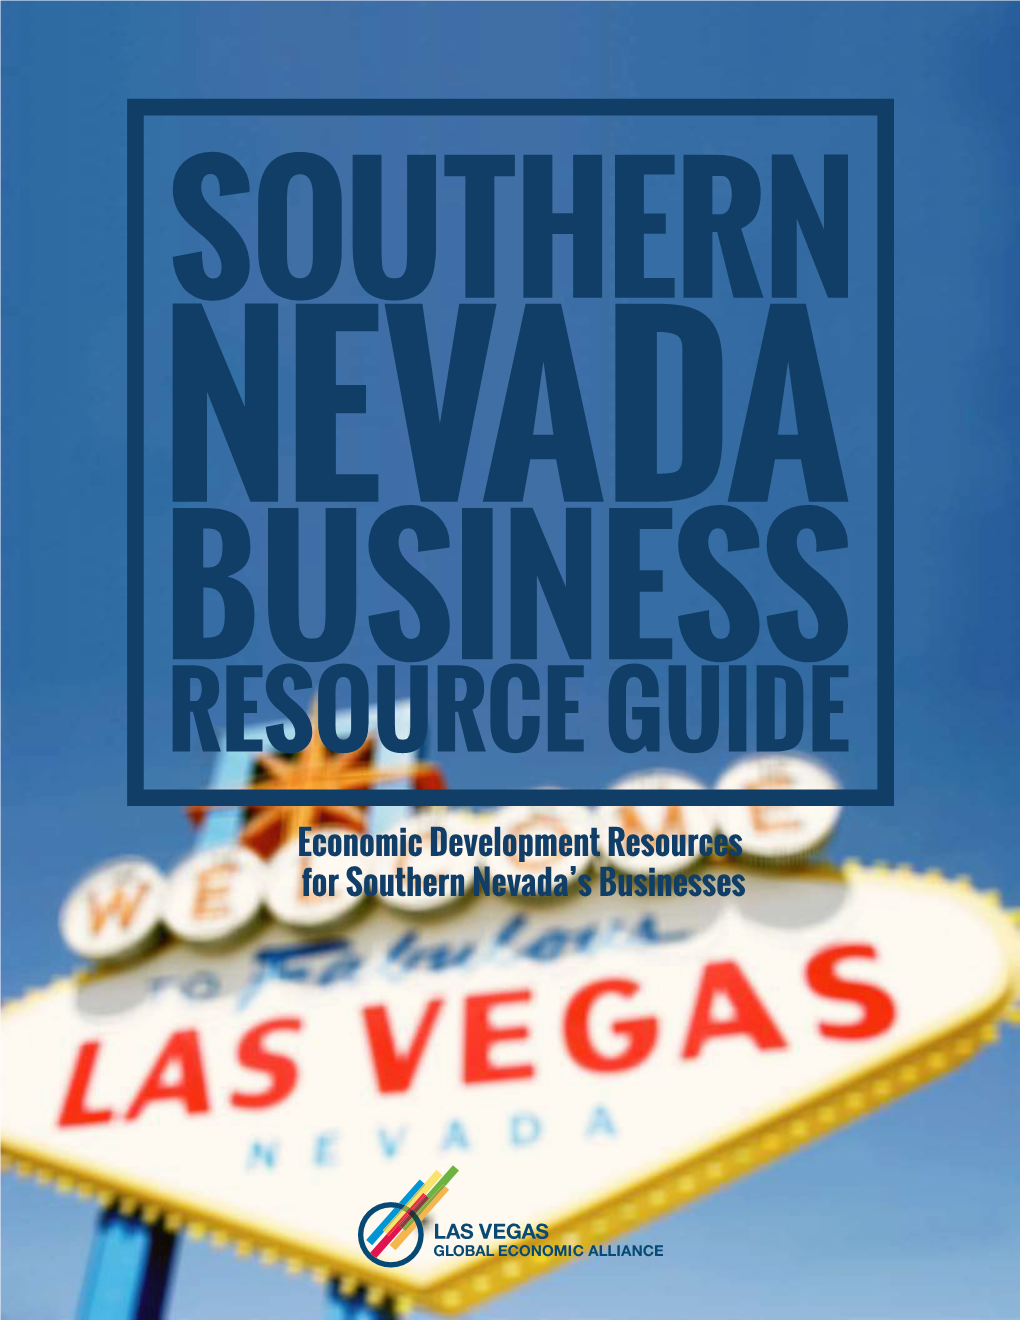 Economic Development Resources for Southern Nevada's Businesses